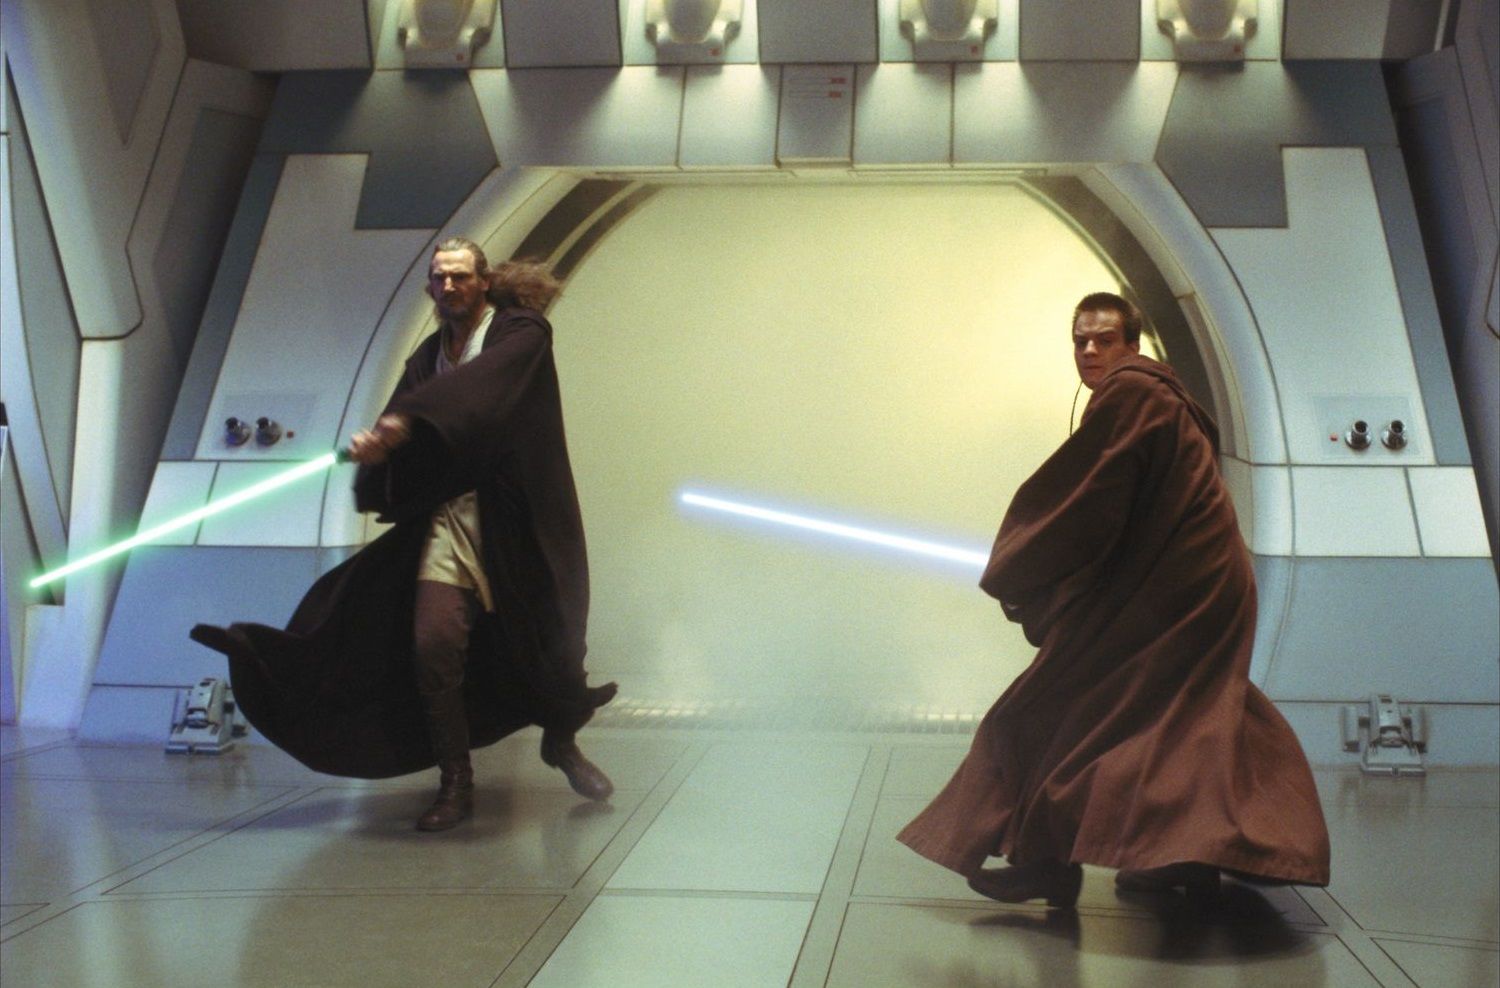 Star Wars Movies in Order: How to Watch Them Chronologically